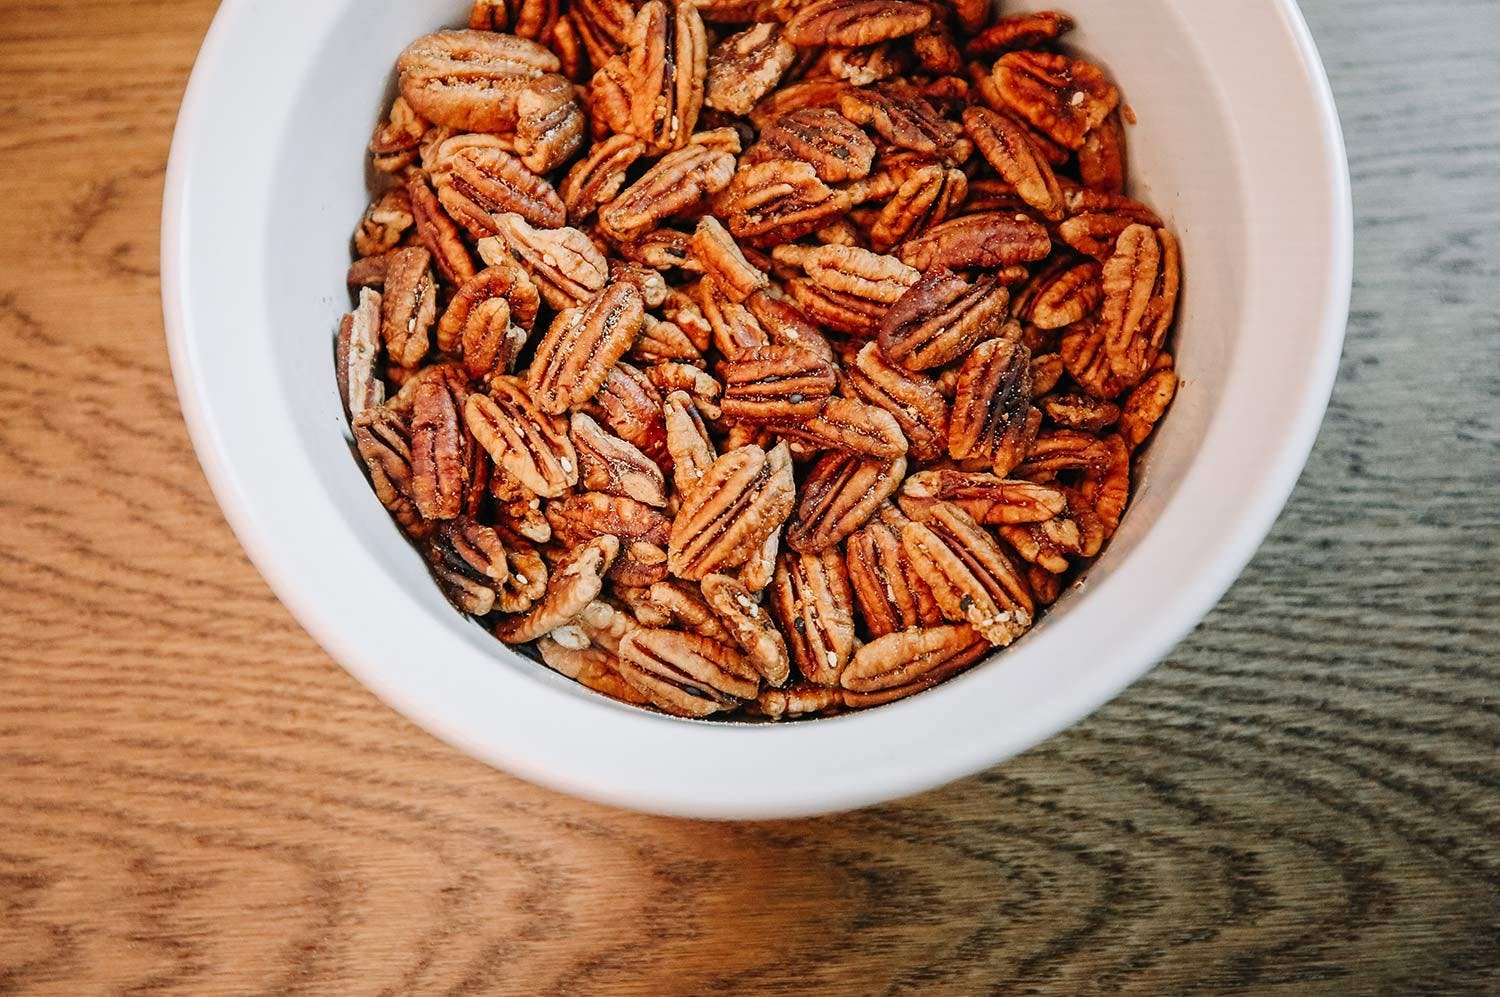 The Holly Furtick recipe: 'Toasted Pecans'